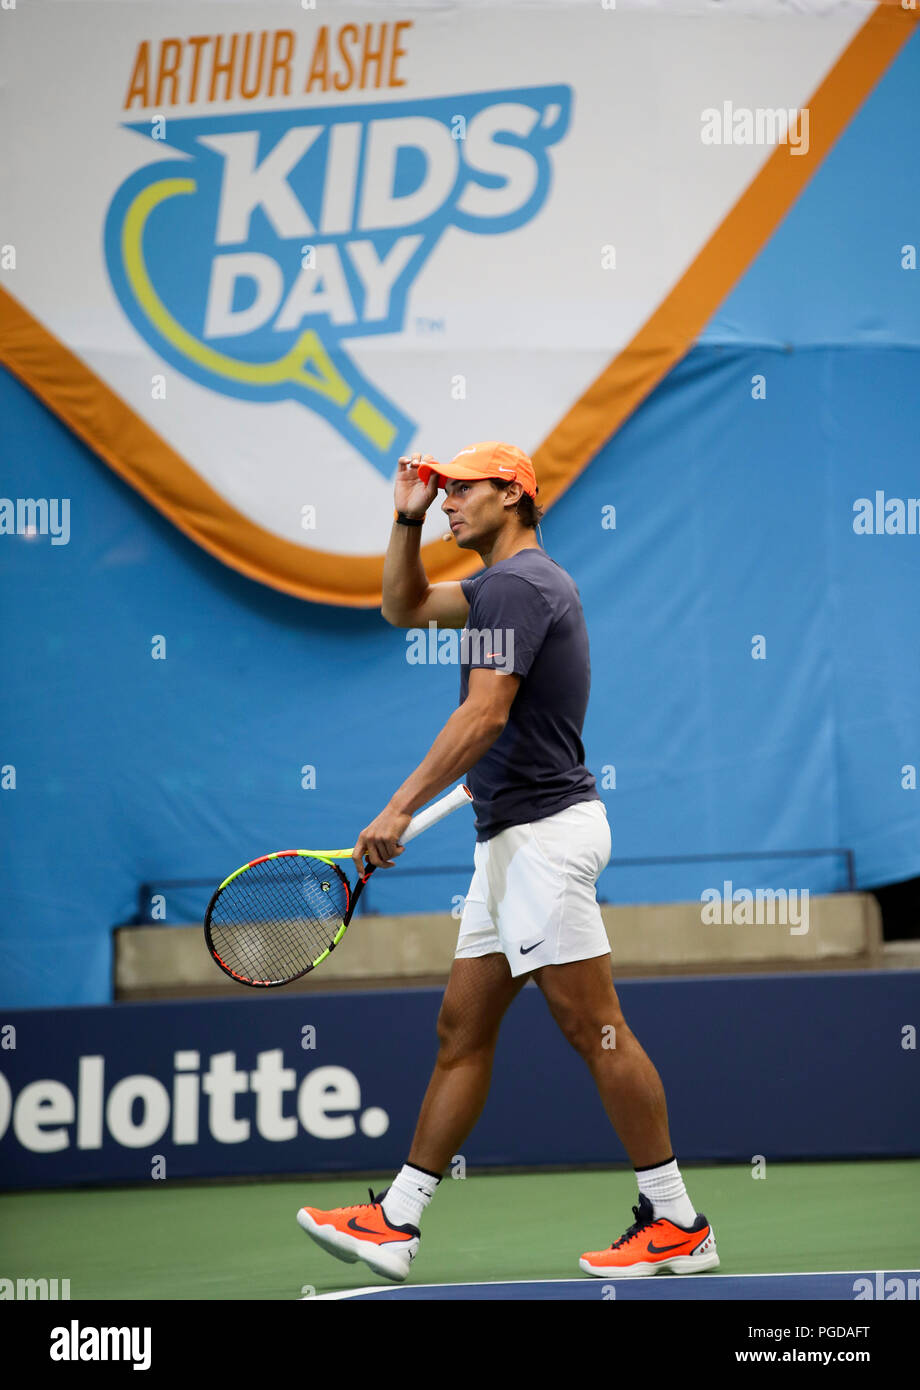 New York, USA. 25th Aug, 2018. Tennis player Rafael Nadal arrives for a tennis technique competition during the Arthur Ashe Kids' Day of the U.S. Open in New York, the United States, Aug. 25, 2018. Credit: Wang Ying/Xinhua/Alamy Live News Stock Photo